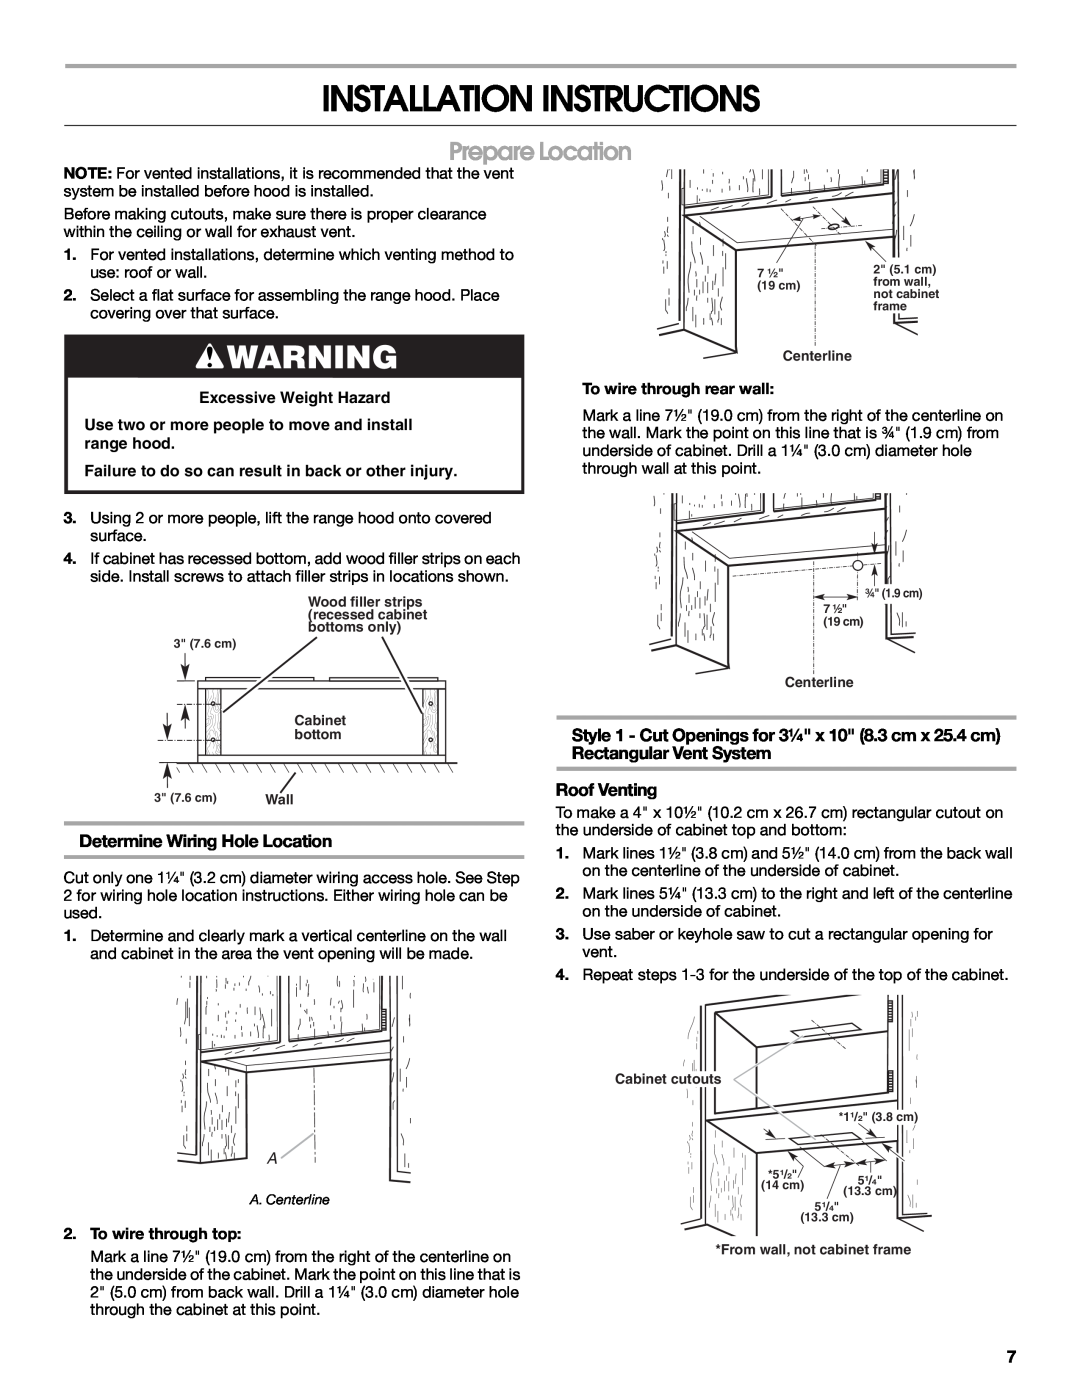 Whirlpool 99044504A, W10240546A Installation Instructions, Prepare Location, Determine Wiring Hole Location, Roof Venting 